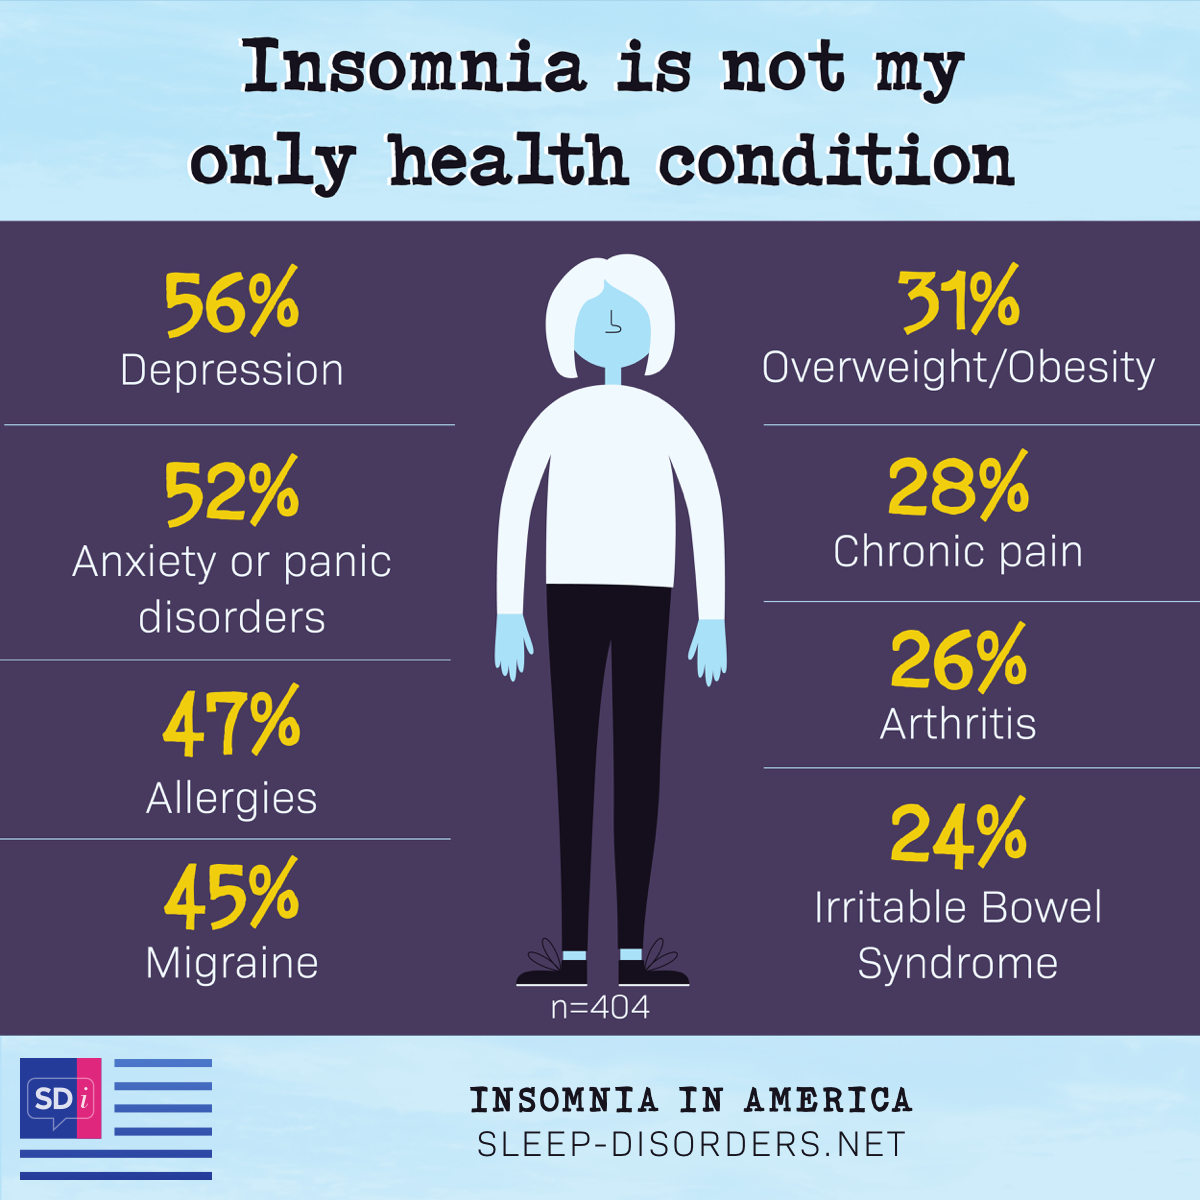 Other health conditions those with insomnia suffer with include depression (56%), anxiety or panic disorder (52%), allergies (47%), migraine (45%), overweight/obesity (31%), chronic pain (28%), arthritis (26%), irritable bowel syndrome (24%).